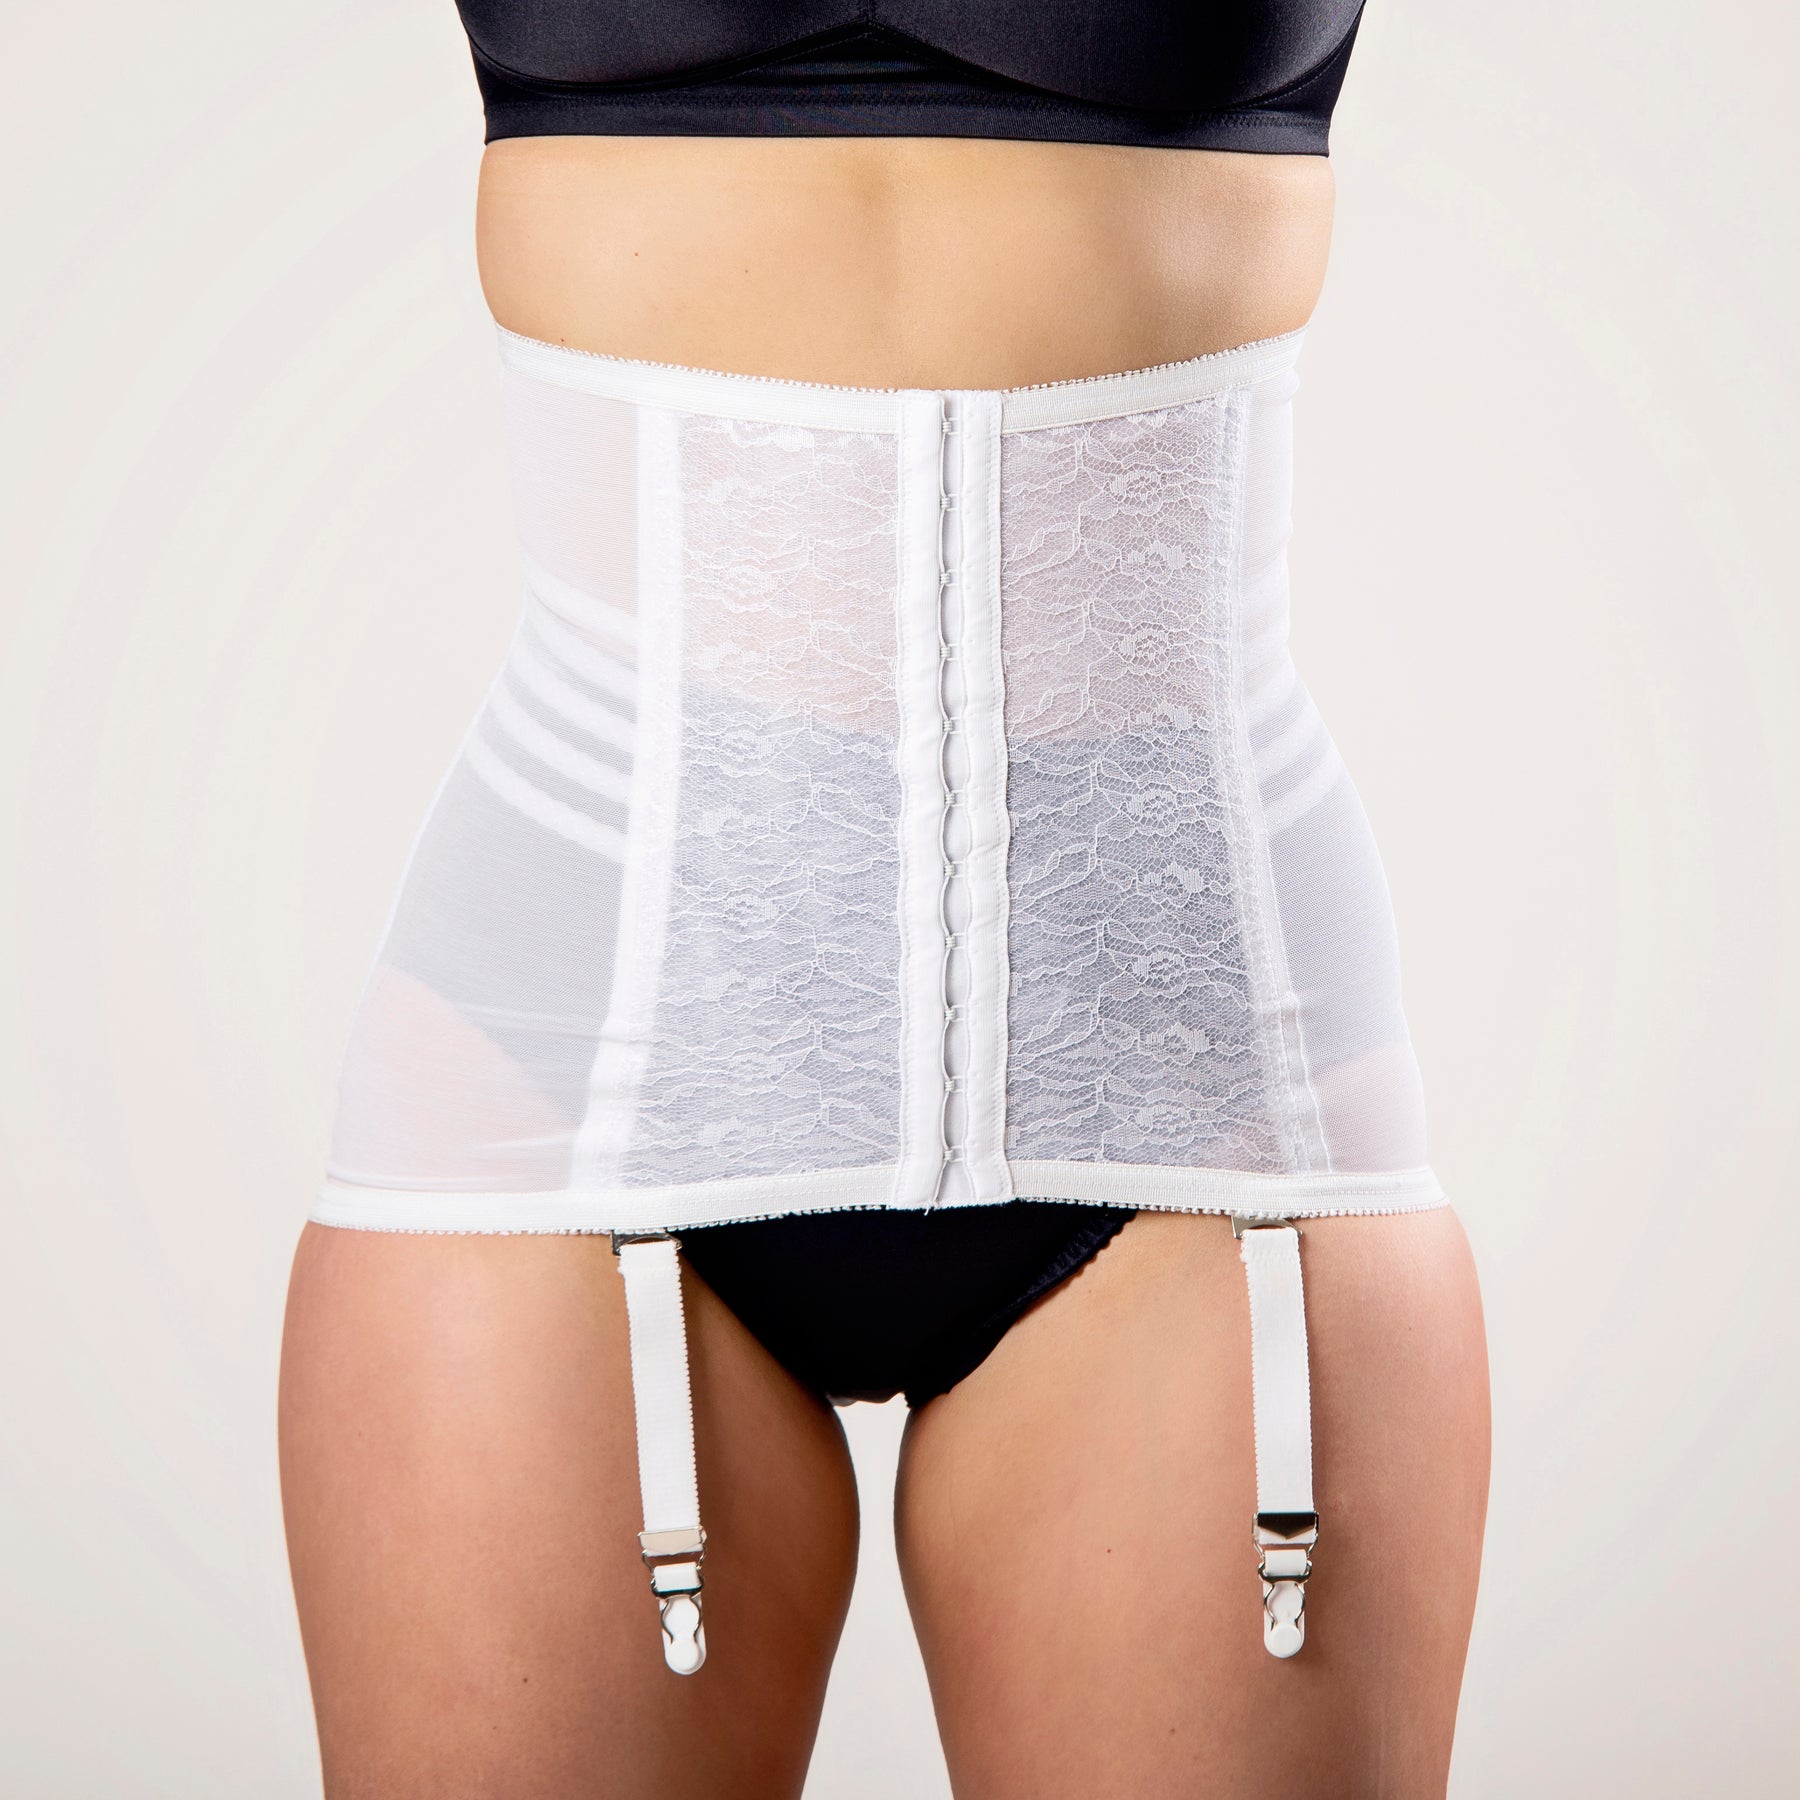 RAGO STYLE 21 – WAIST TRAINER / GIRDLE WITH GARTERS FIRM SHAPING – Body By  Cassie